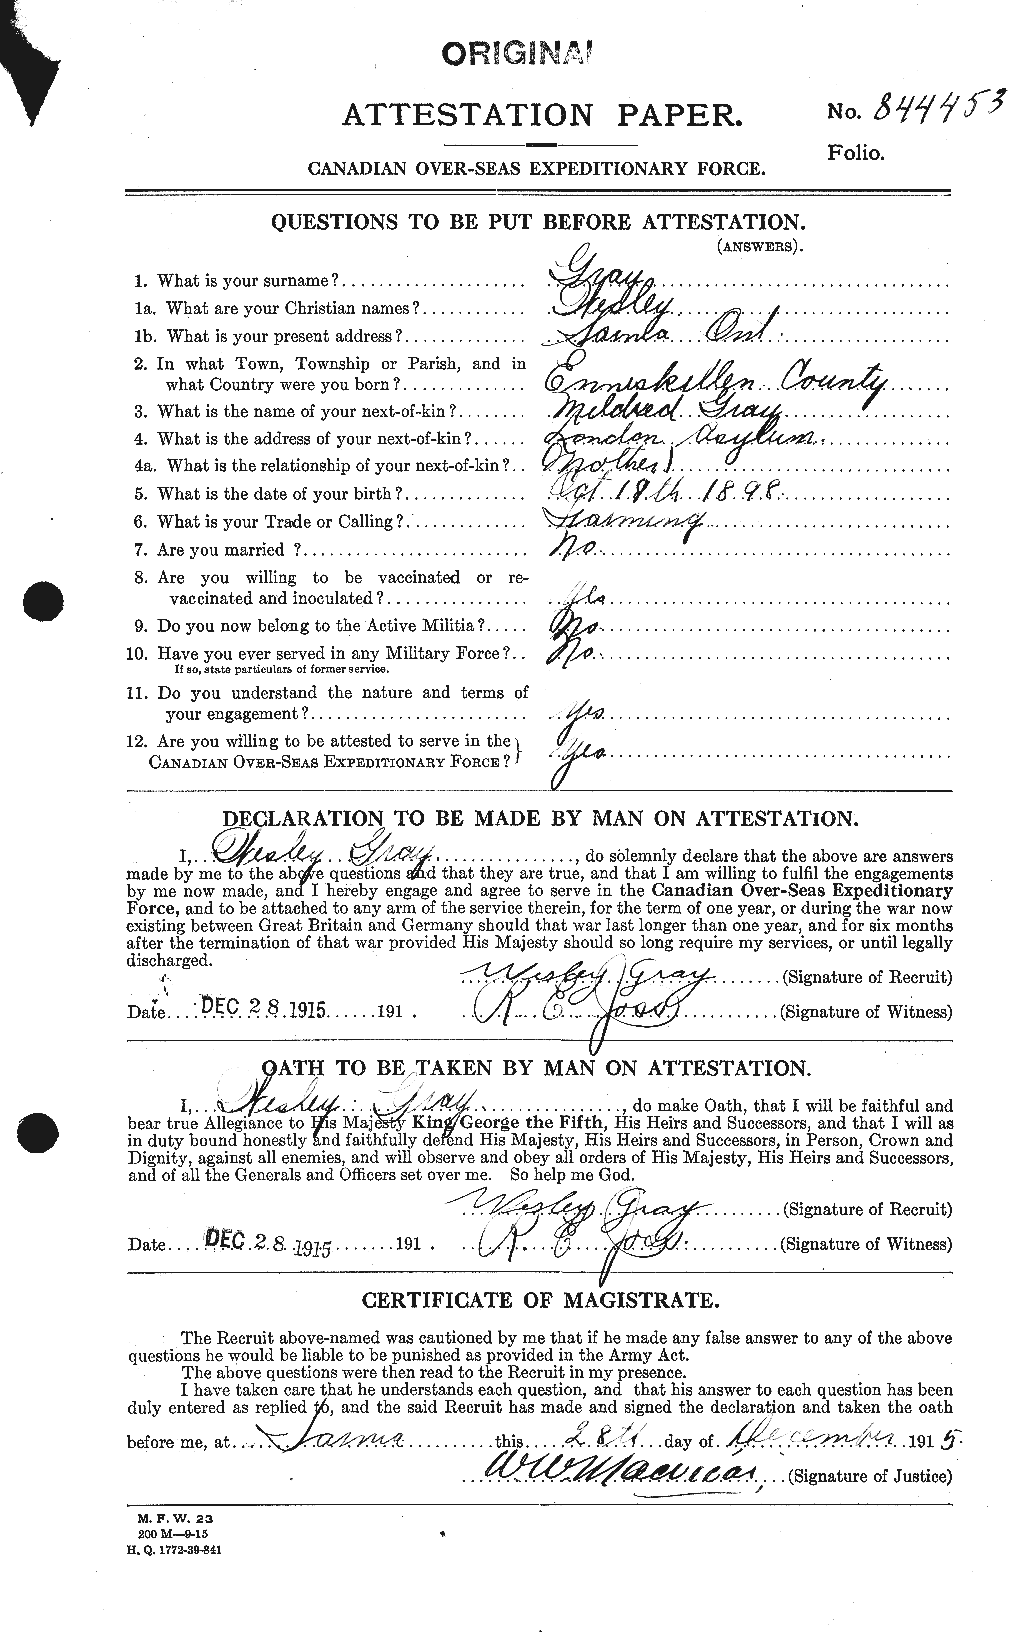 Personnel Records of the First World War - CEF 361755a